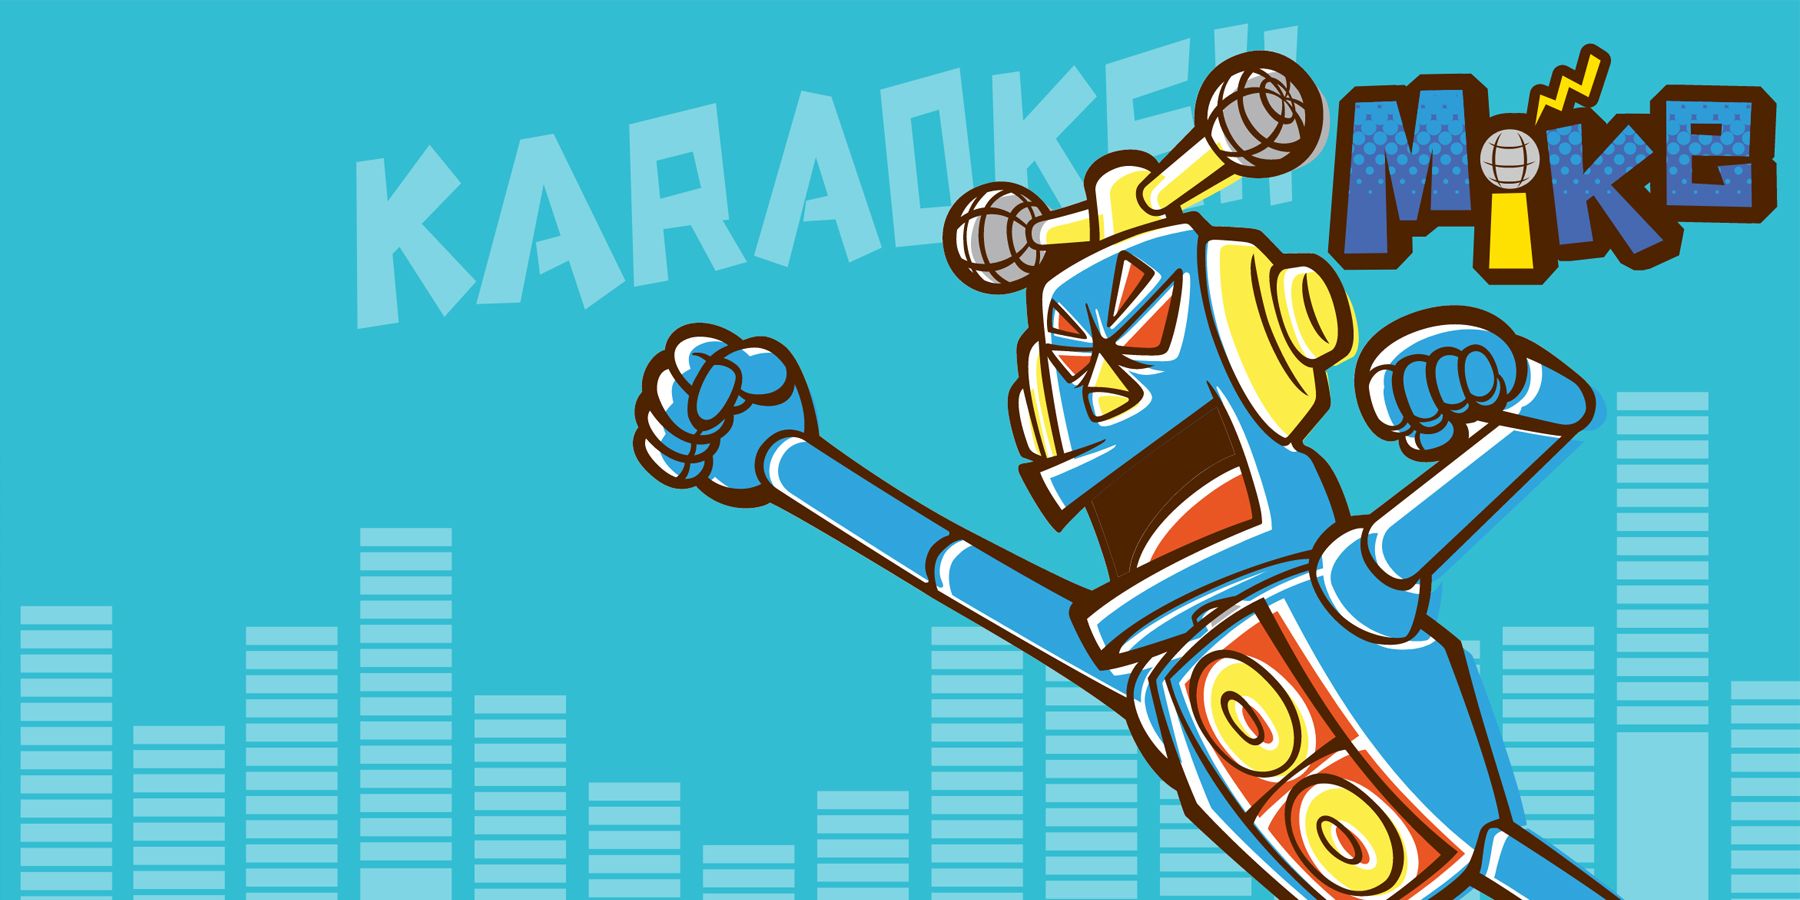 WarioWare's karaoke robot Mike pumps his fist in this promotional artwork for WarioWare: Touched!